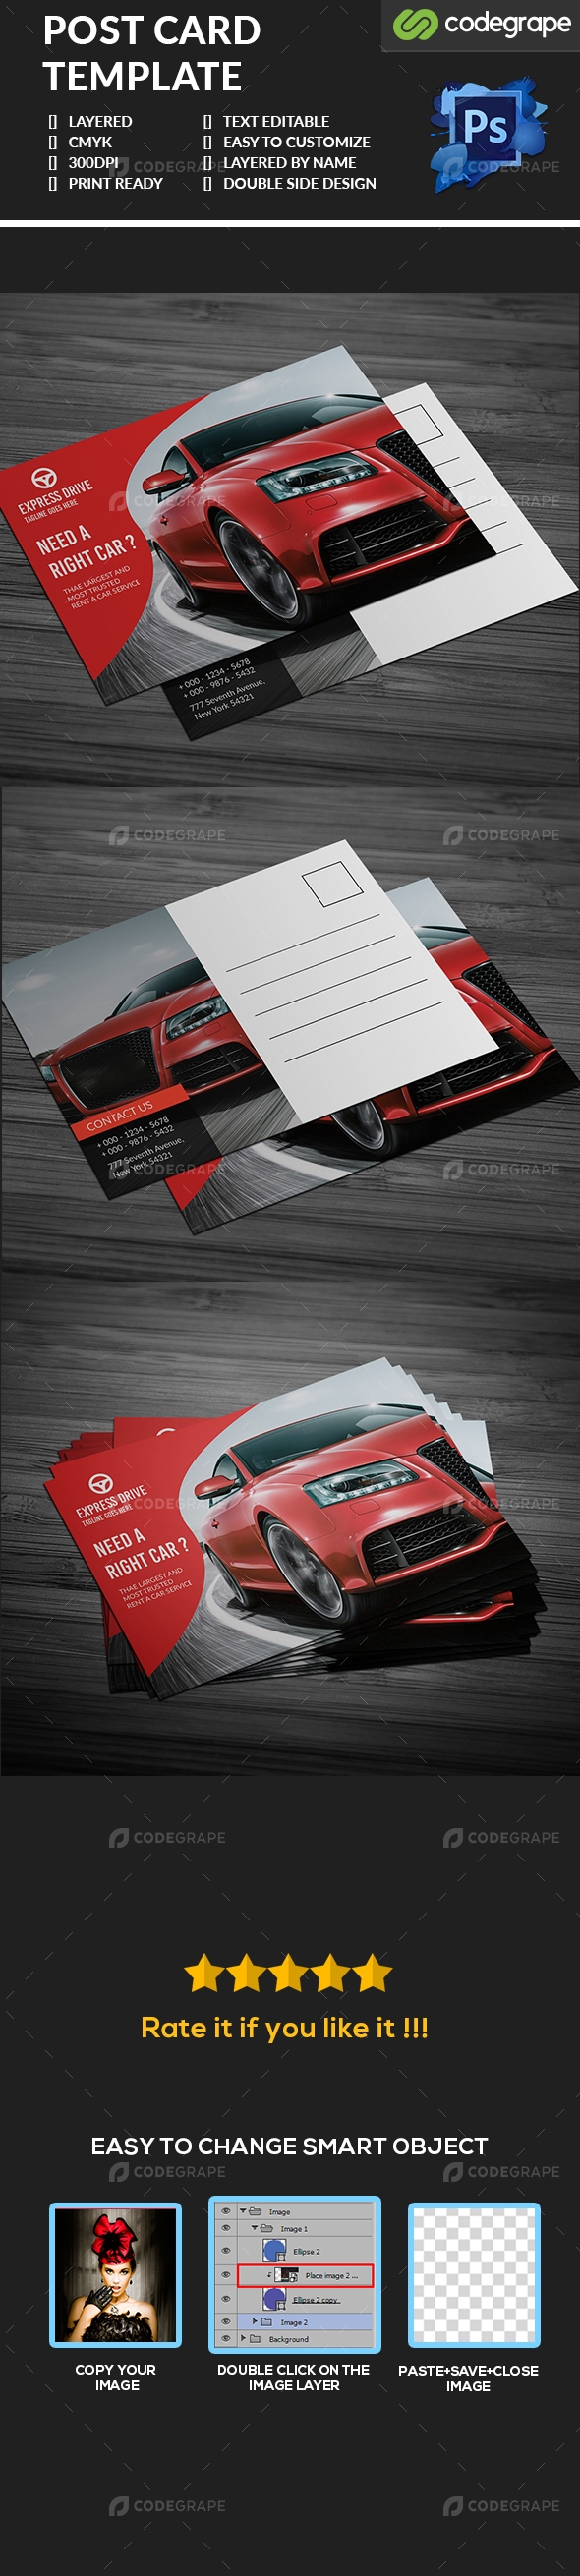 Photography Post Card Template